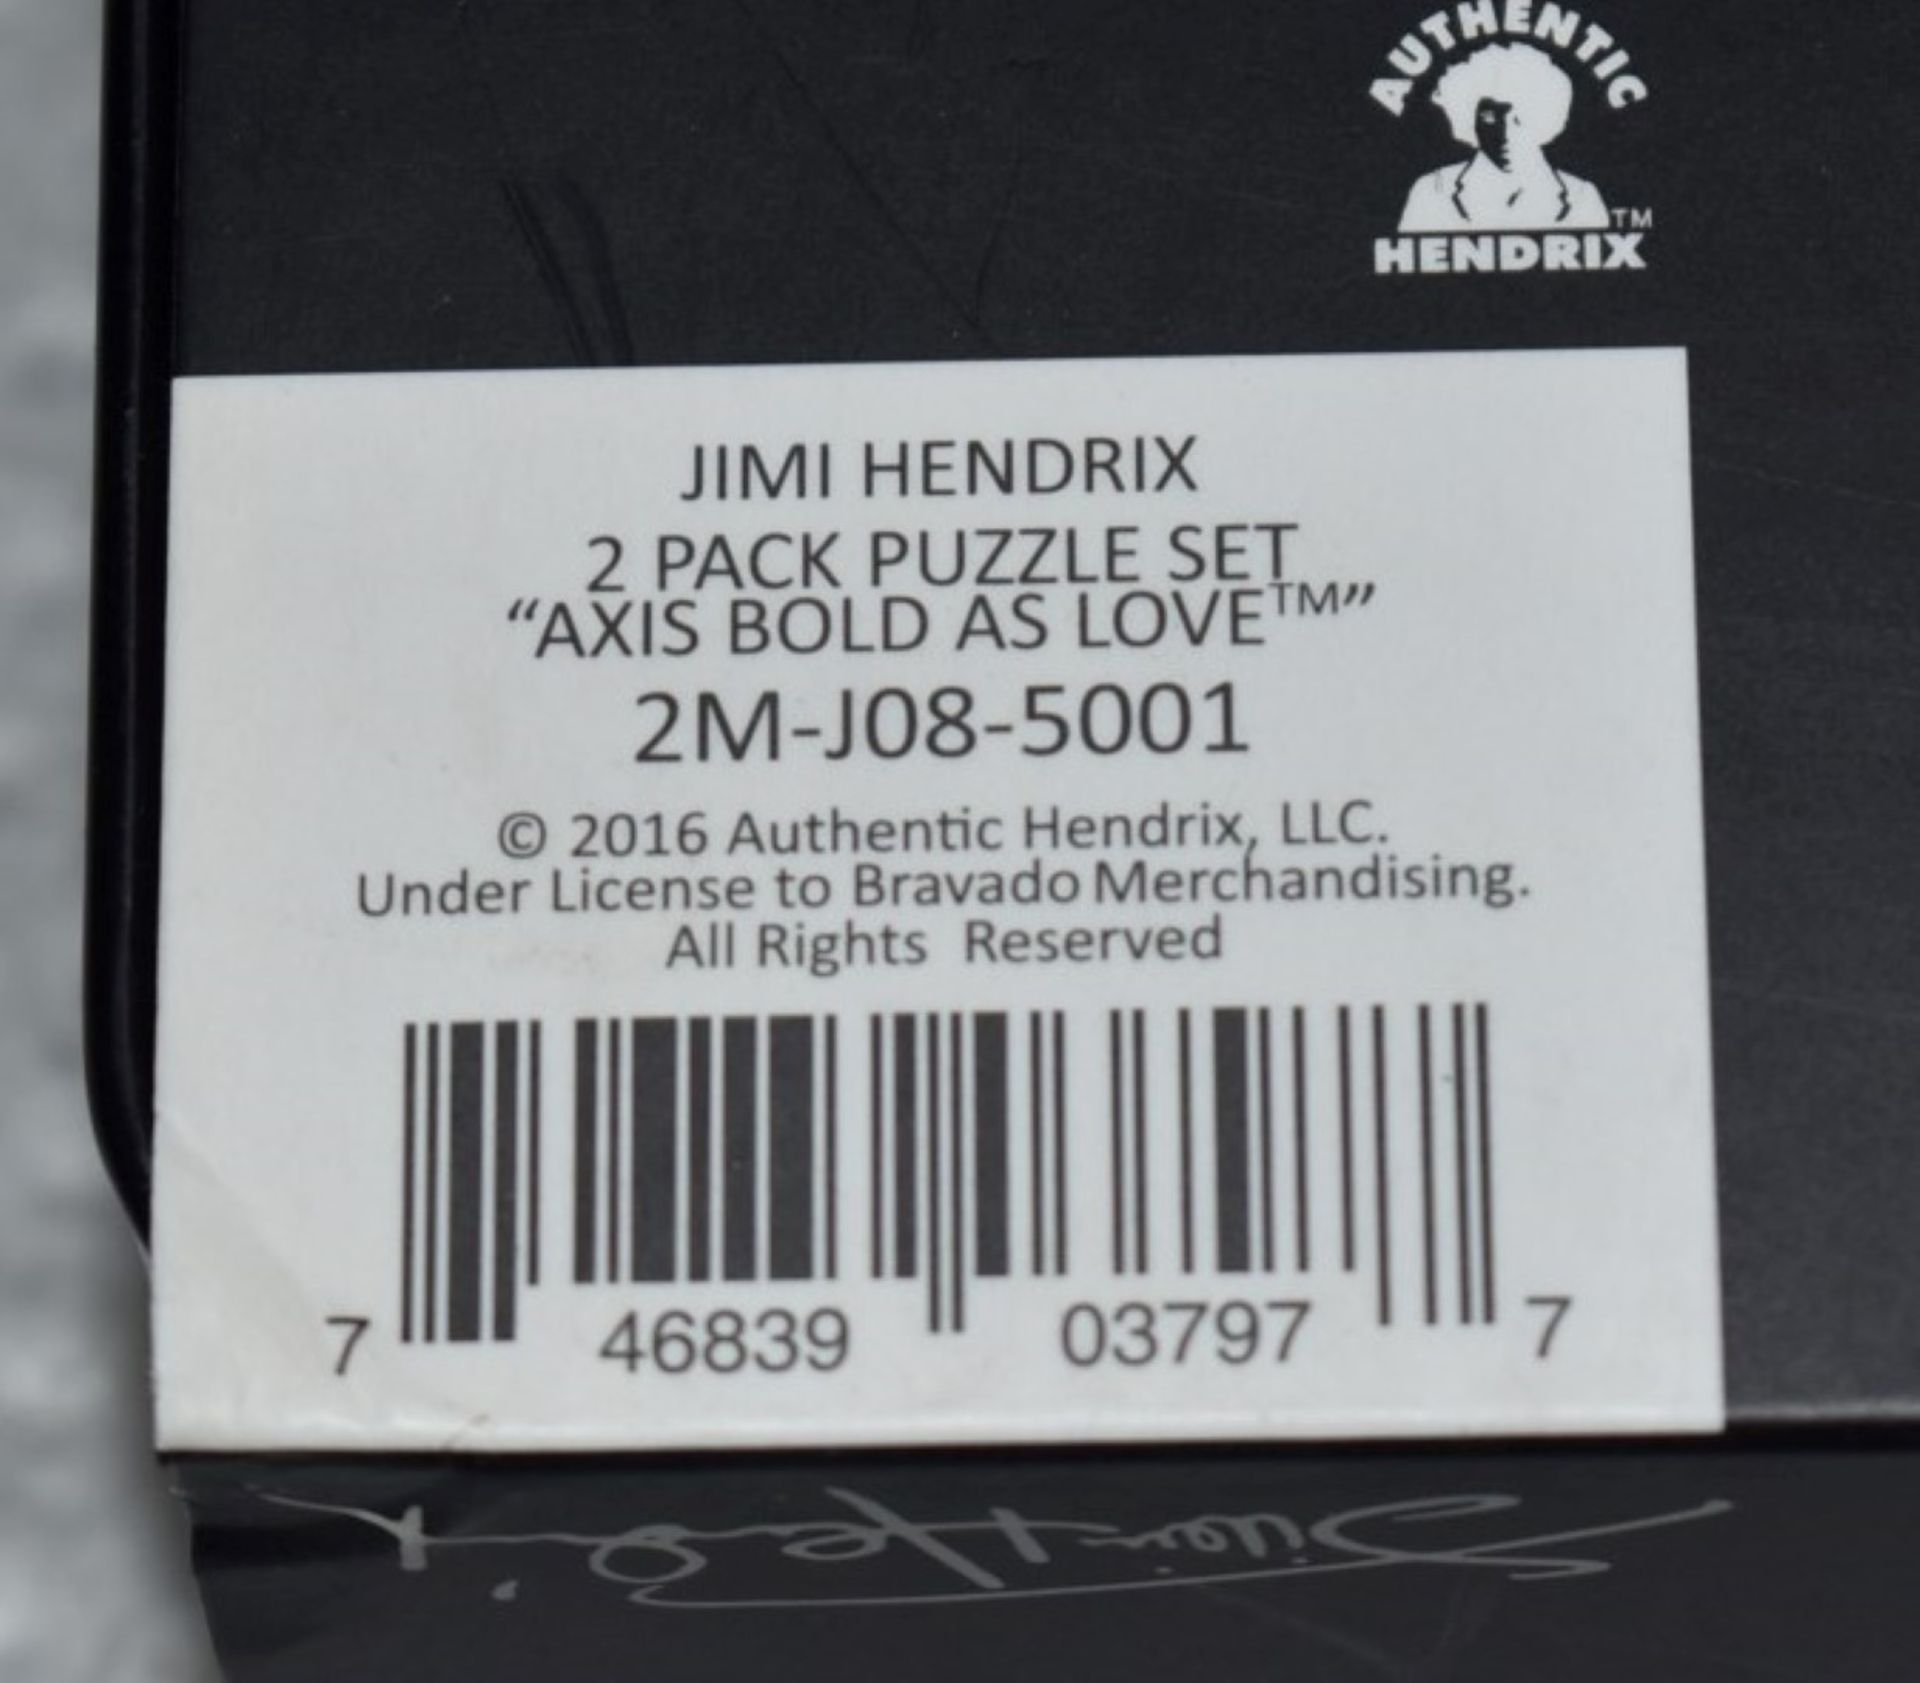 1 x Jimmy Hendrix Jigsaw Puzzle Set By Iconic Concepts - Includes 2 x 256pc Jigsaws in Collectors - Image 5 of 6